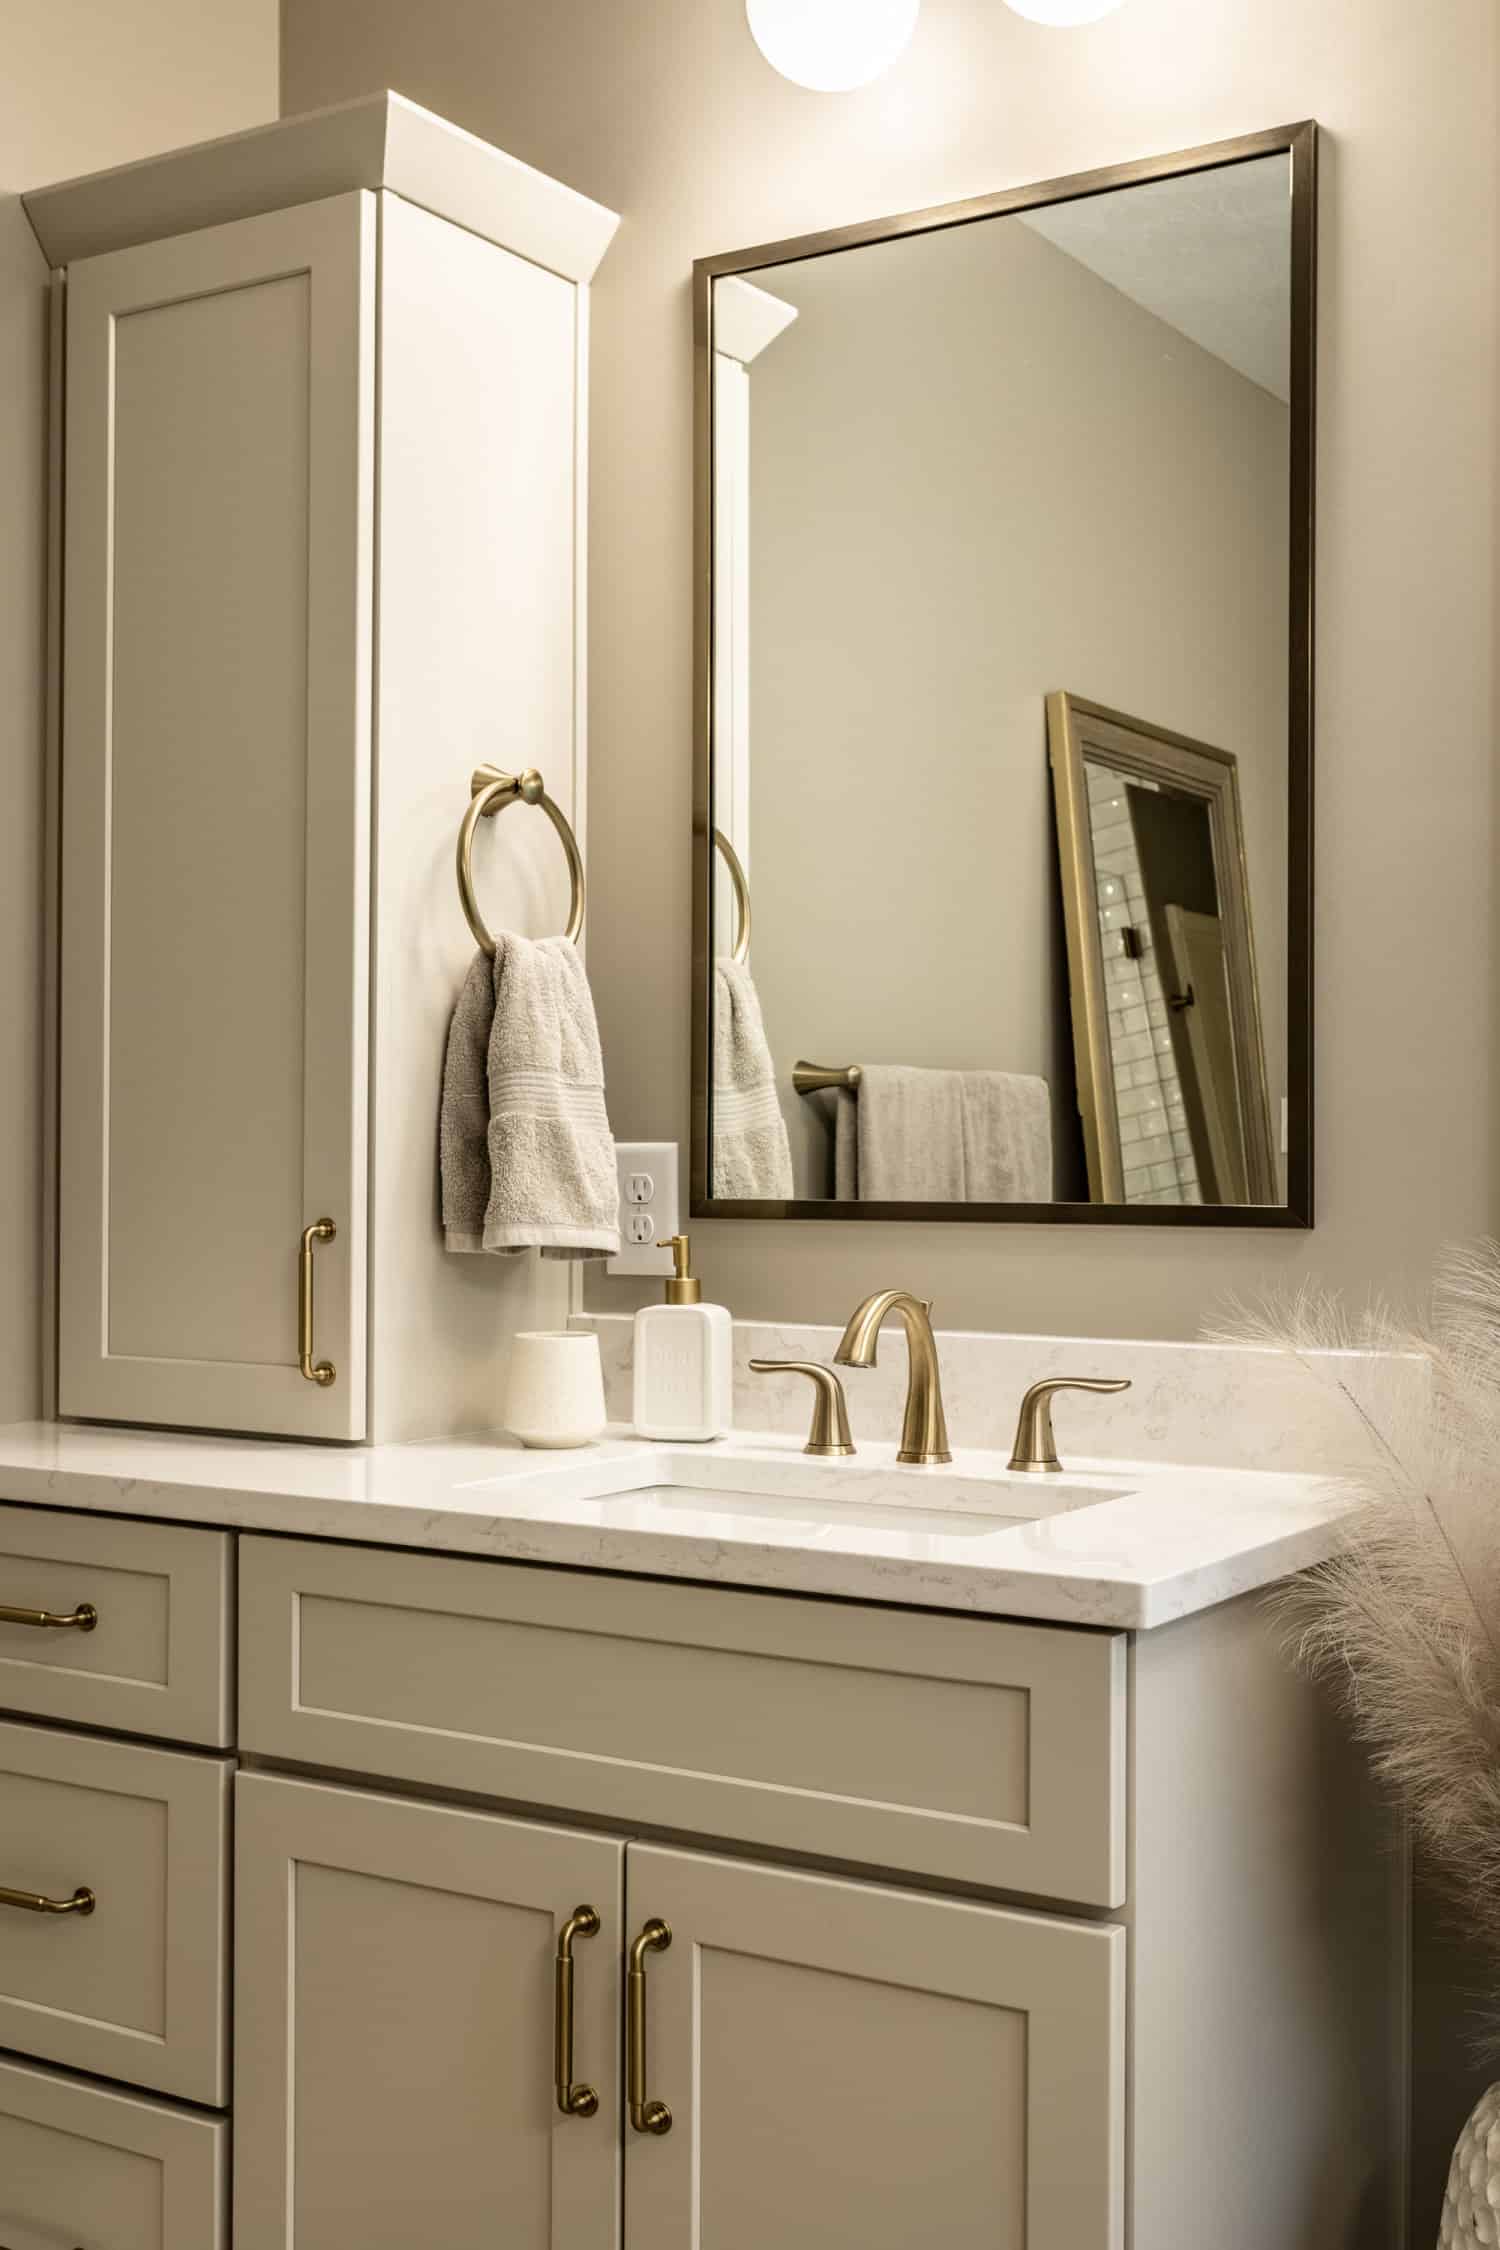 Nicholas Design Build | A modern bathroom with white cabinets and a brushed gold mirror.